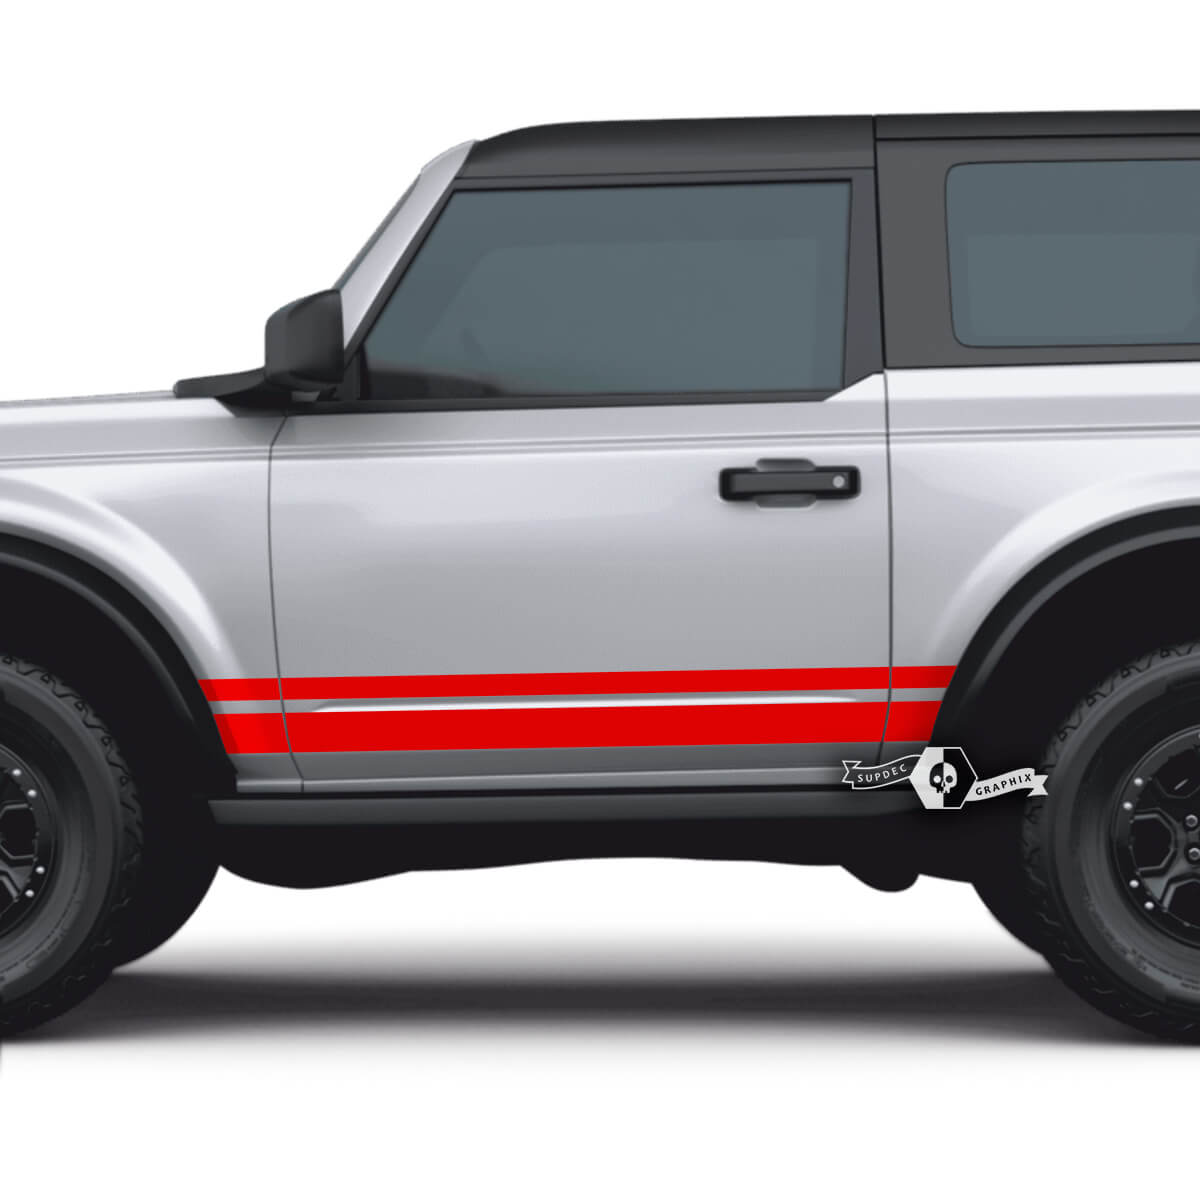 Pair of 2 Doors Ford Bronco Side Decals Stickers for Ford Bronco
